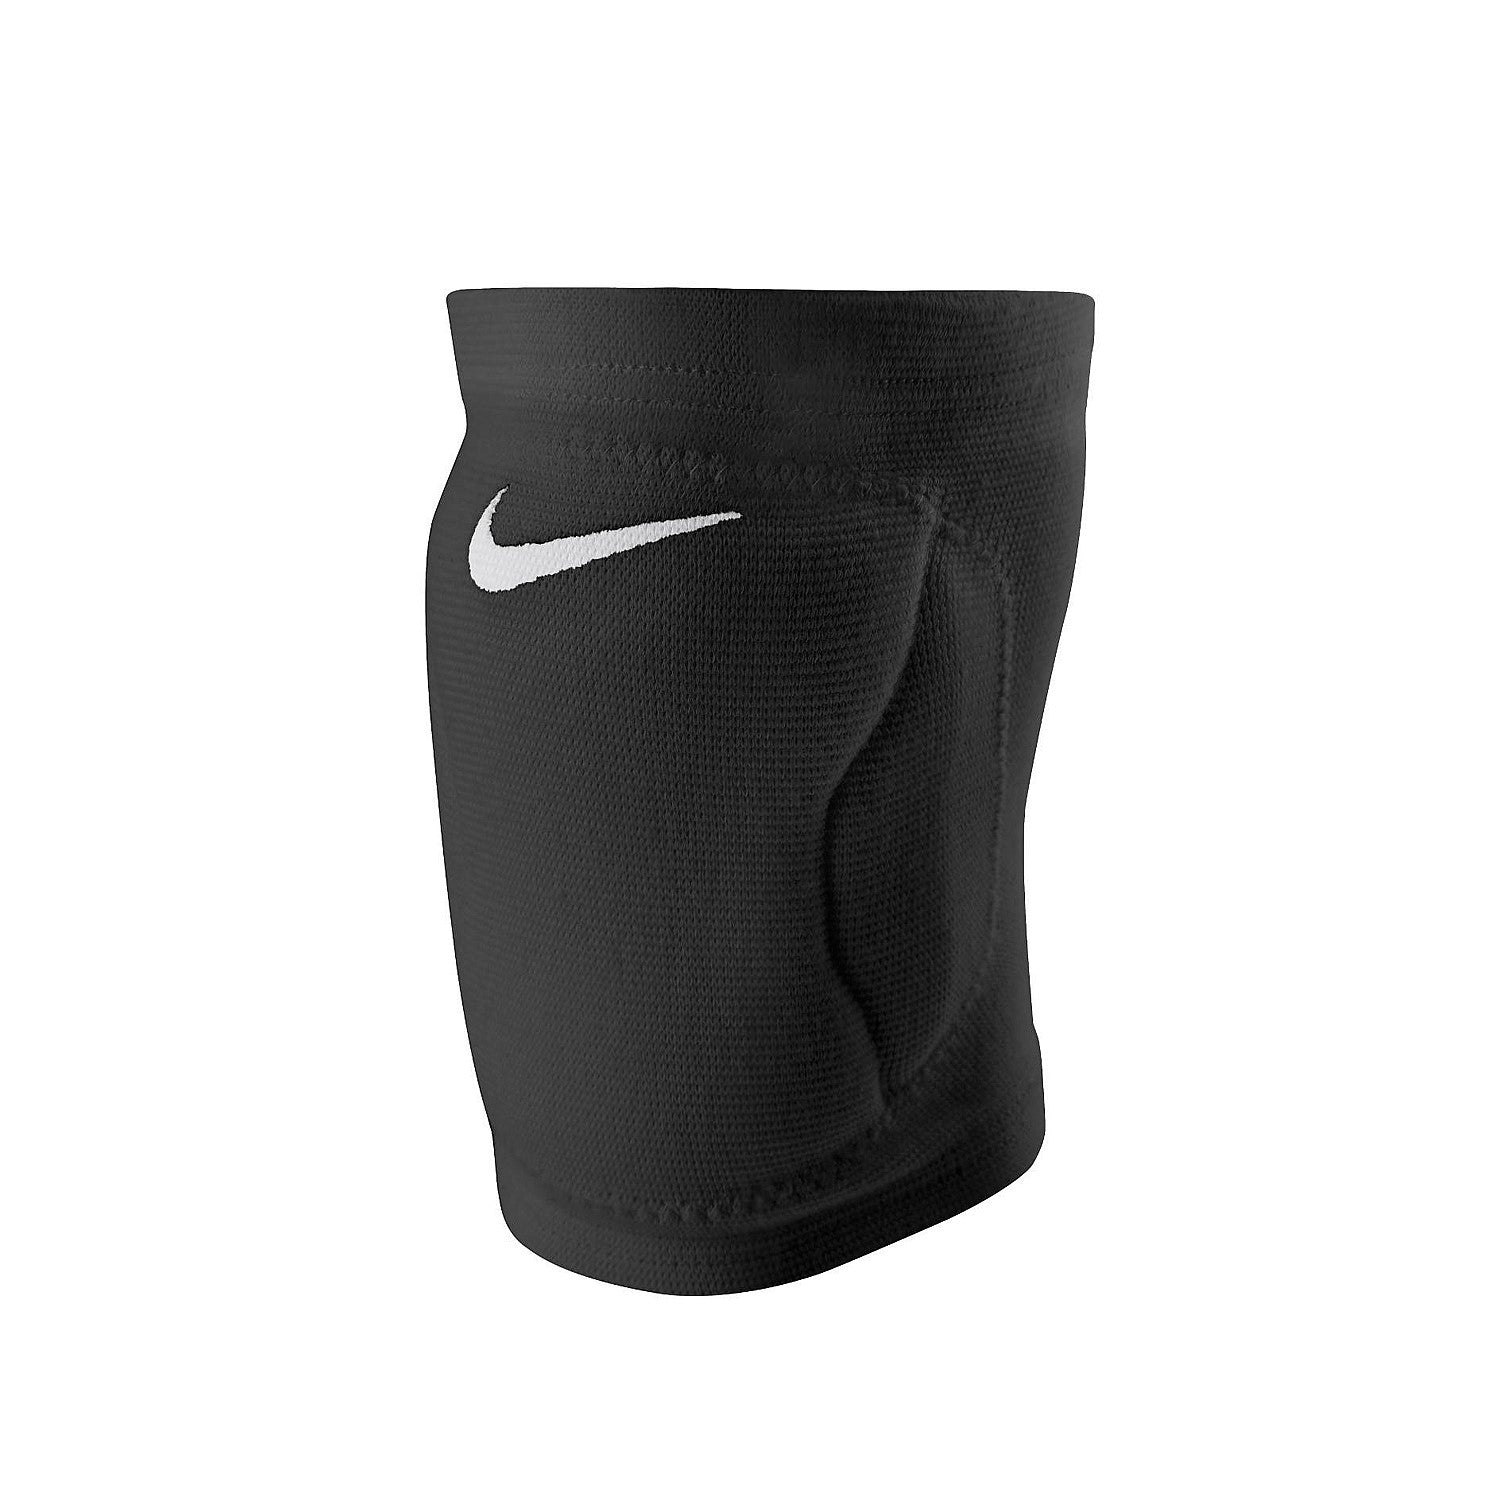 Nike Essential Volleyball Knee Pad | Midway Sports.